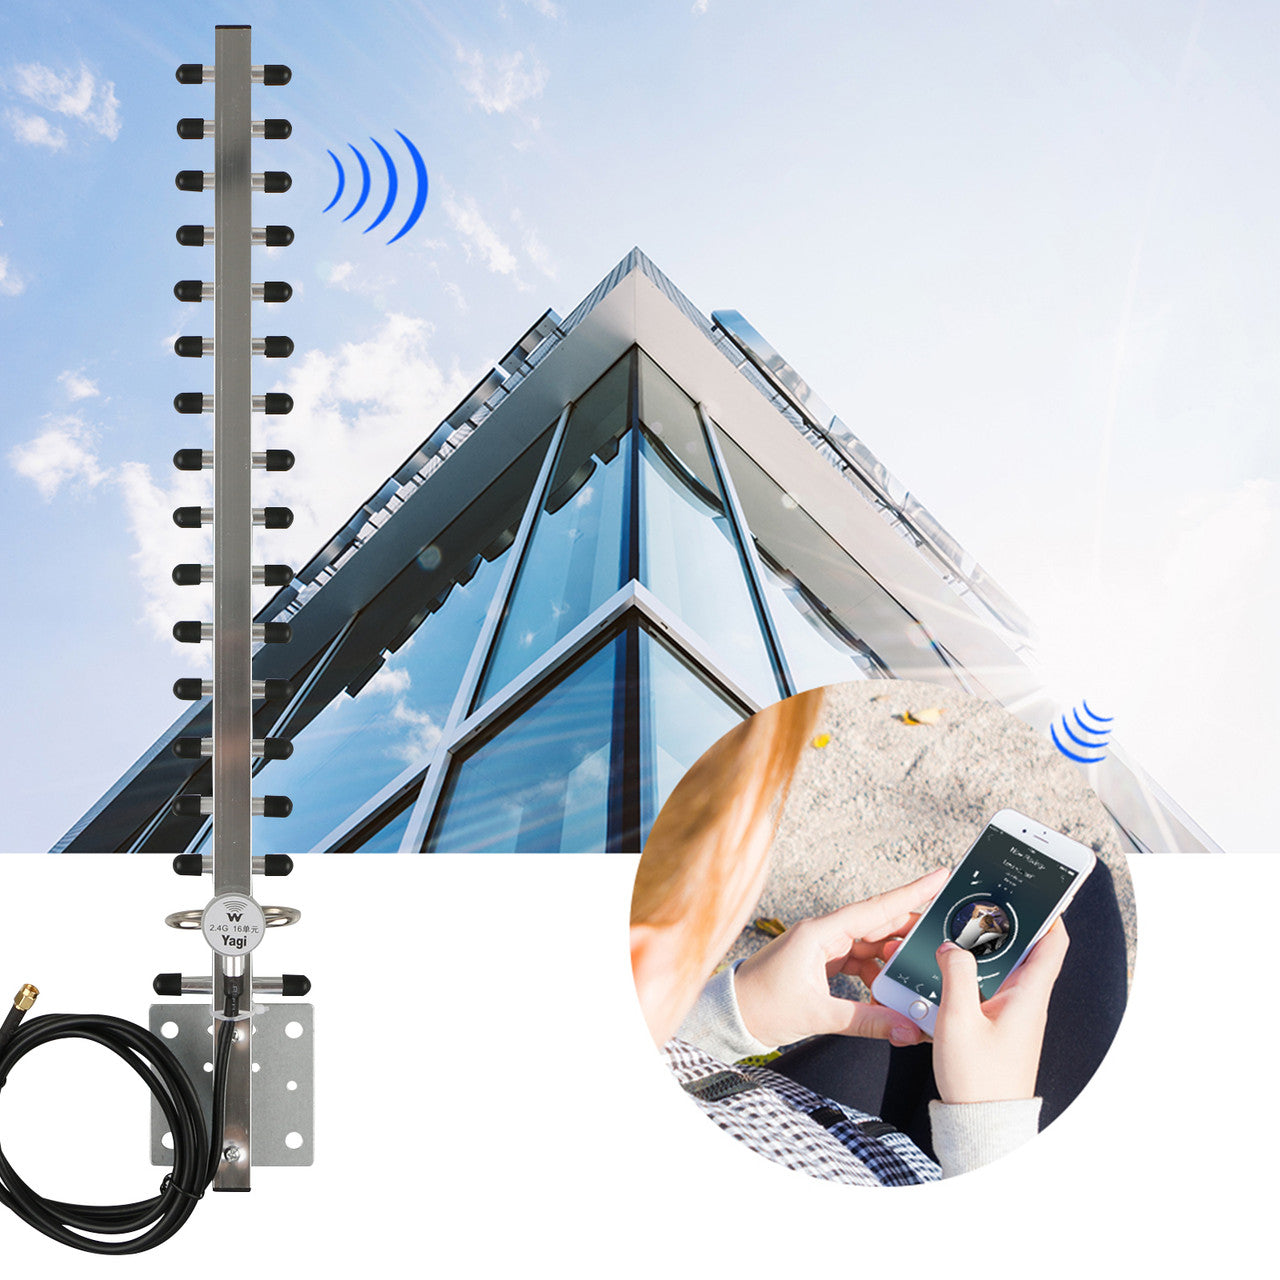 25dbi Yagi 4G LTE Antenna SMA Male Directional Cell Phone Signal Booster Amplifier Modem RG58 5 Feet Cable